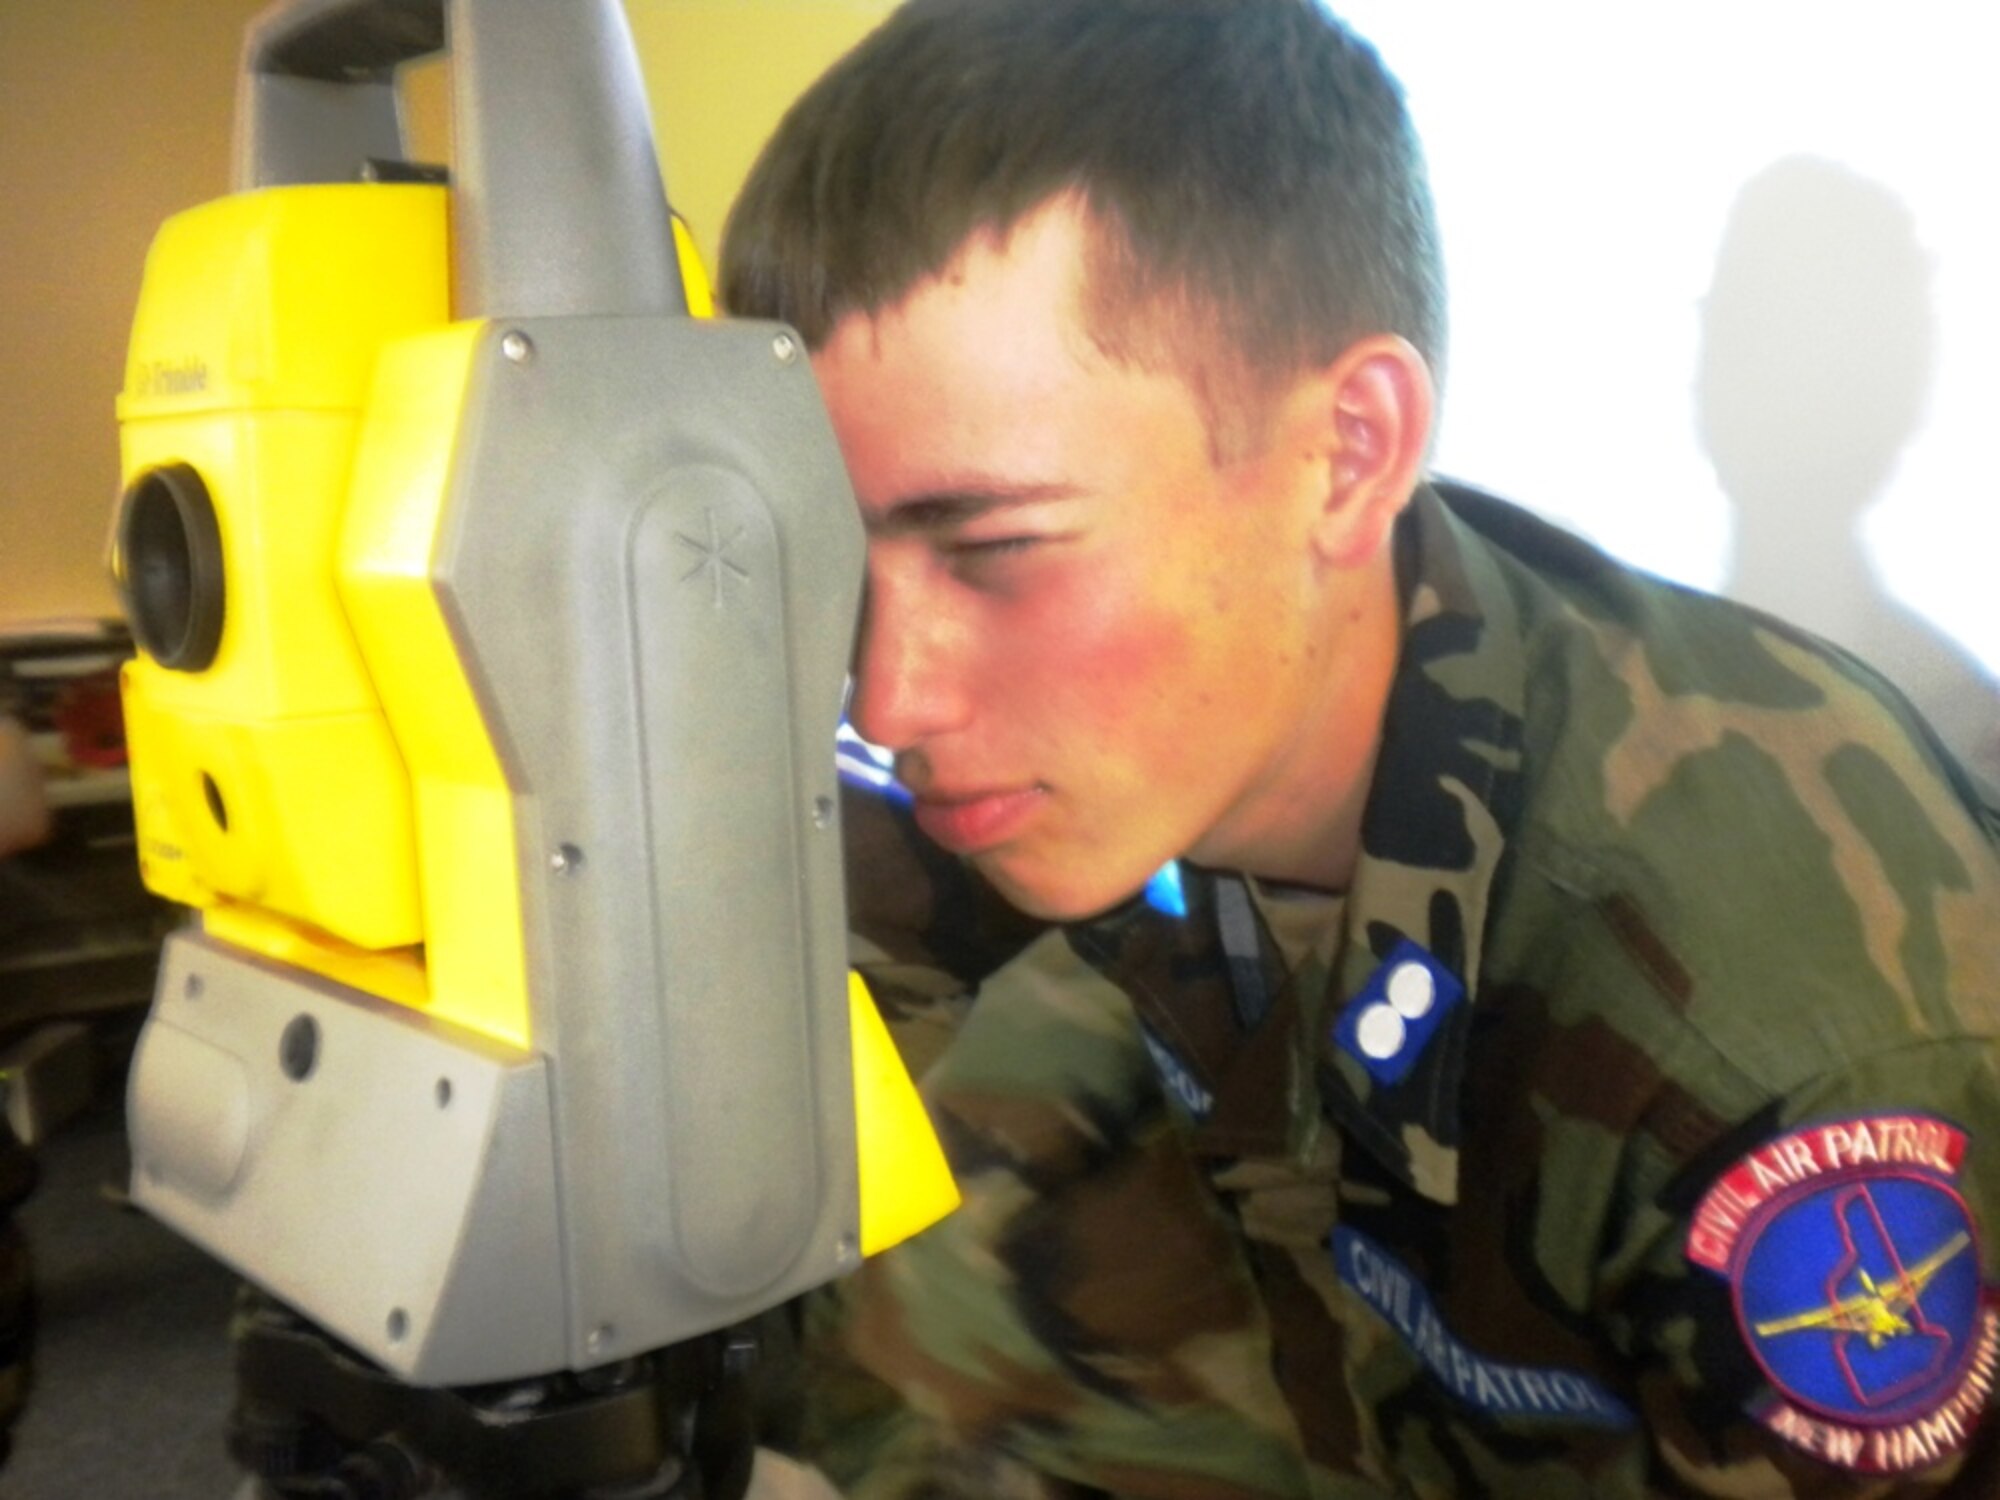 At the Civil Air Patrol's Air Force Civil Engineering Academy at Tyndall, Cadet 1st Lt. Noah Johnson of New Hampshire's Lebanon Composite Squadron looks through a transit that would be used to survey a job site by Air Force engineering assistants. (Courtesy photo)
